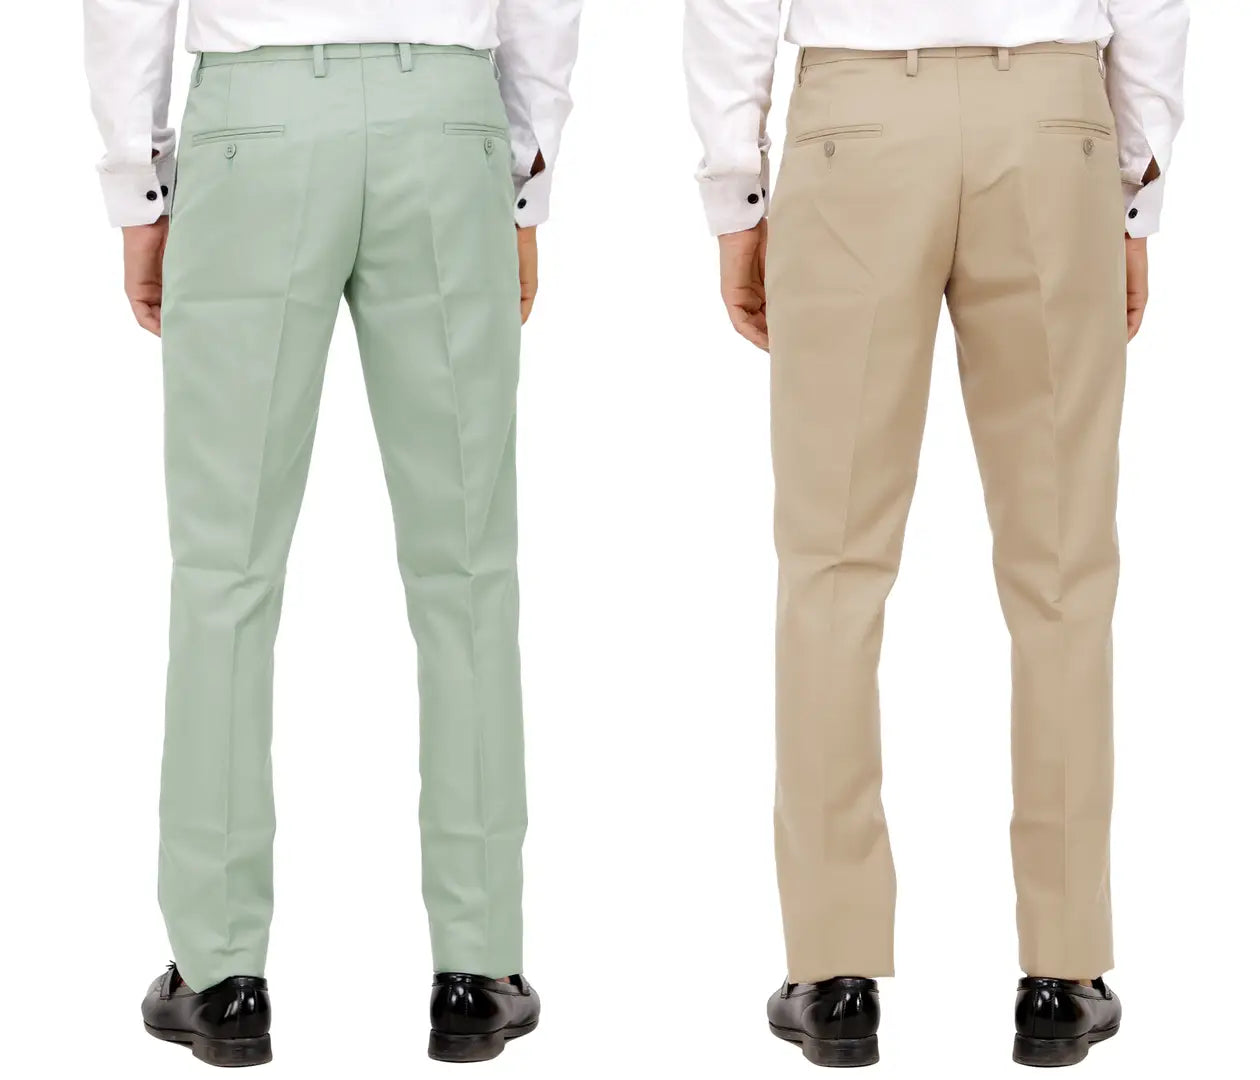 Kundan Men Poly-Viscose Blended Olive Green and Beige Formal Trousers ( Pack of 2 Trousers )